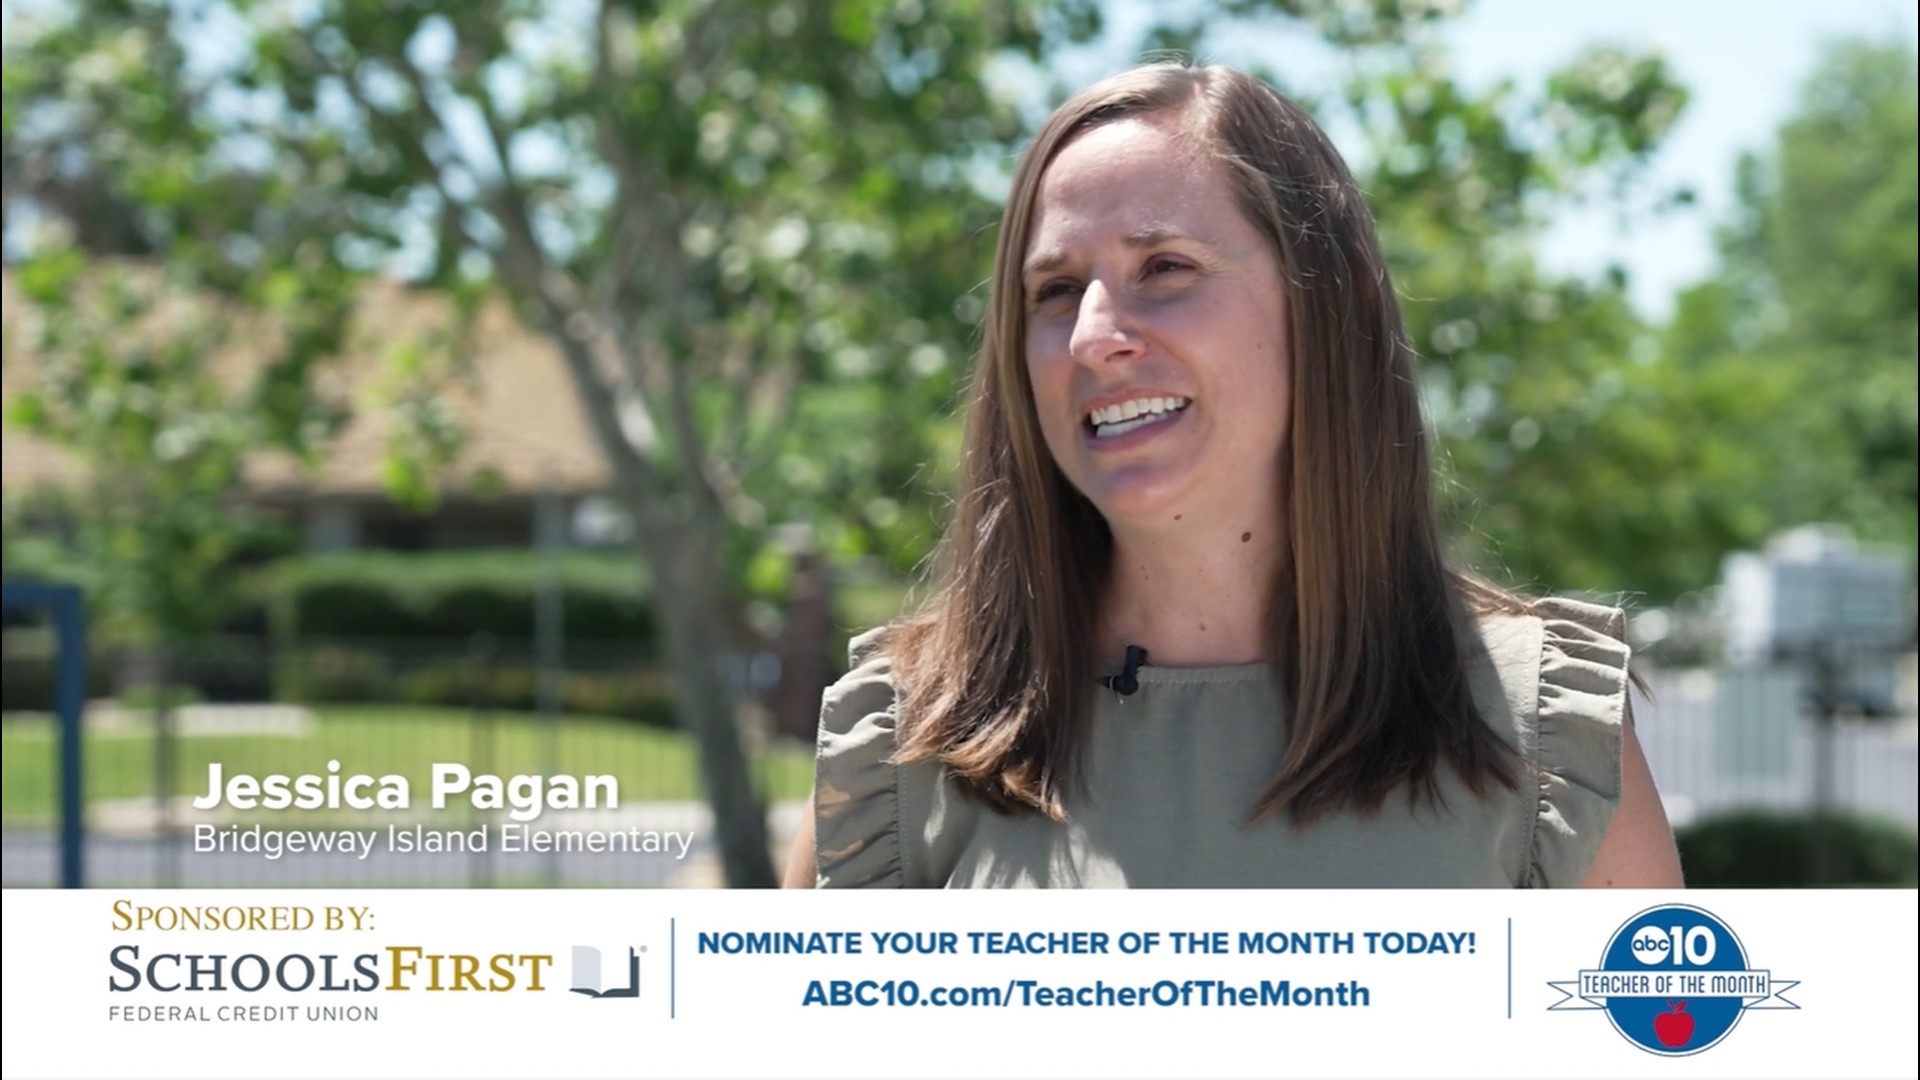 Ms. Pagan has been teaching for 15 years and currently teaches first grade students at Bridgeway Island Elementary.